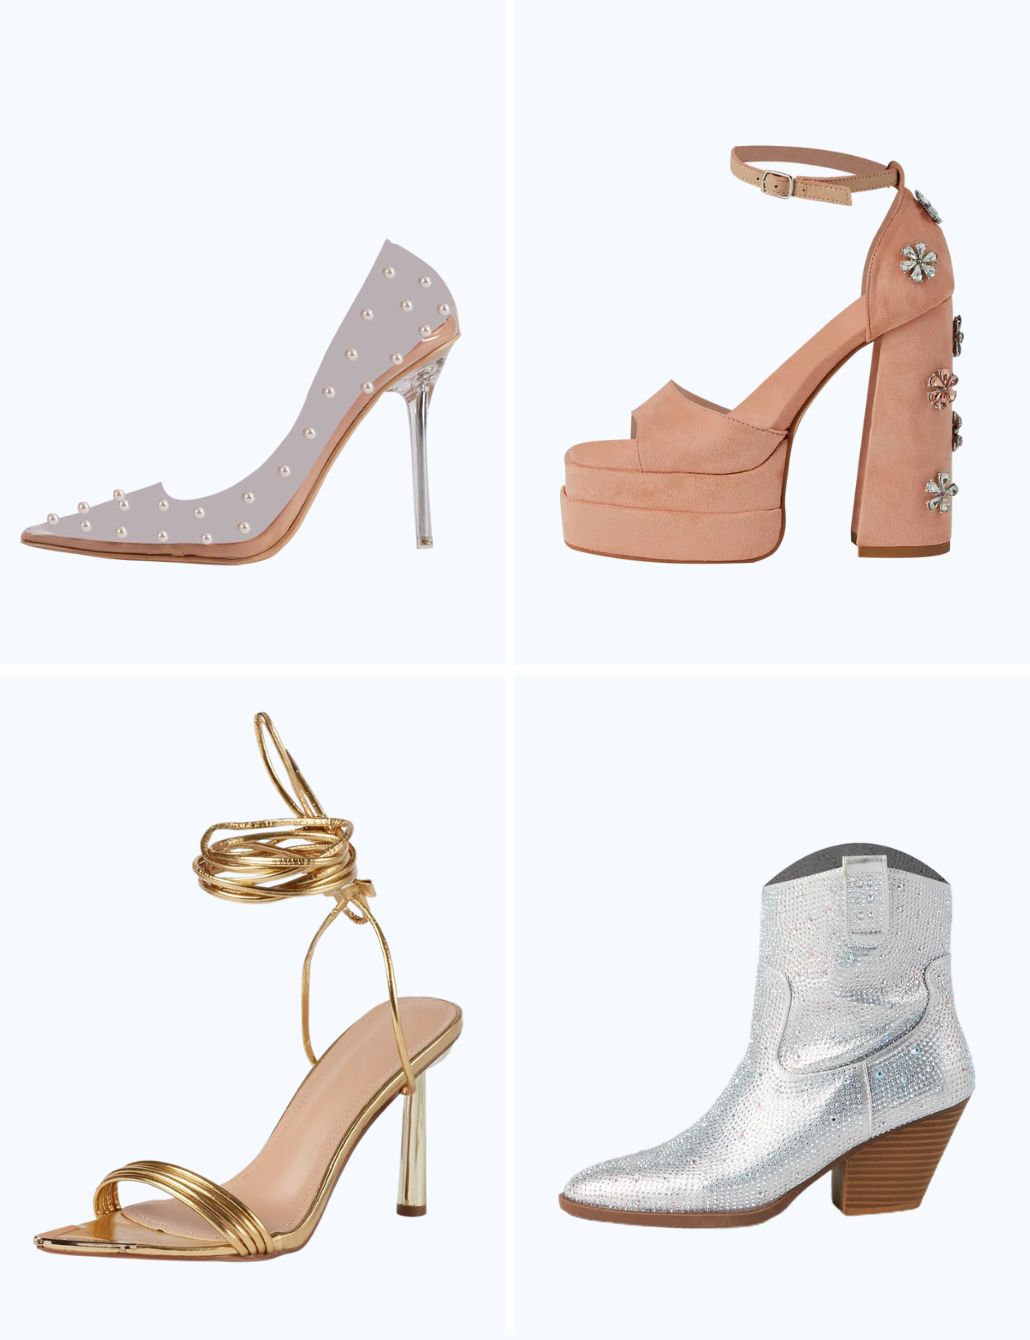 5 Pairs Of Heels That Will Go With Any Outfit | The 411 | PLT